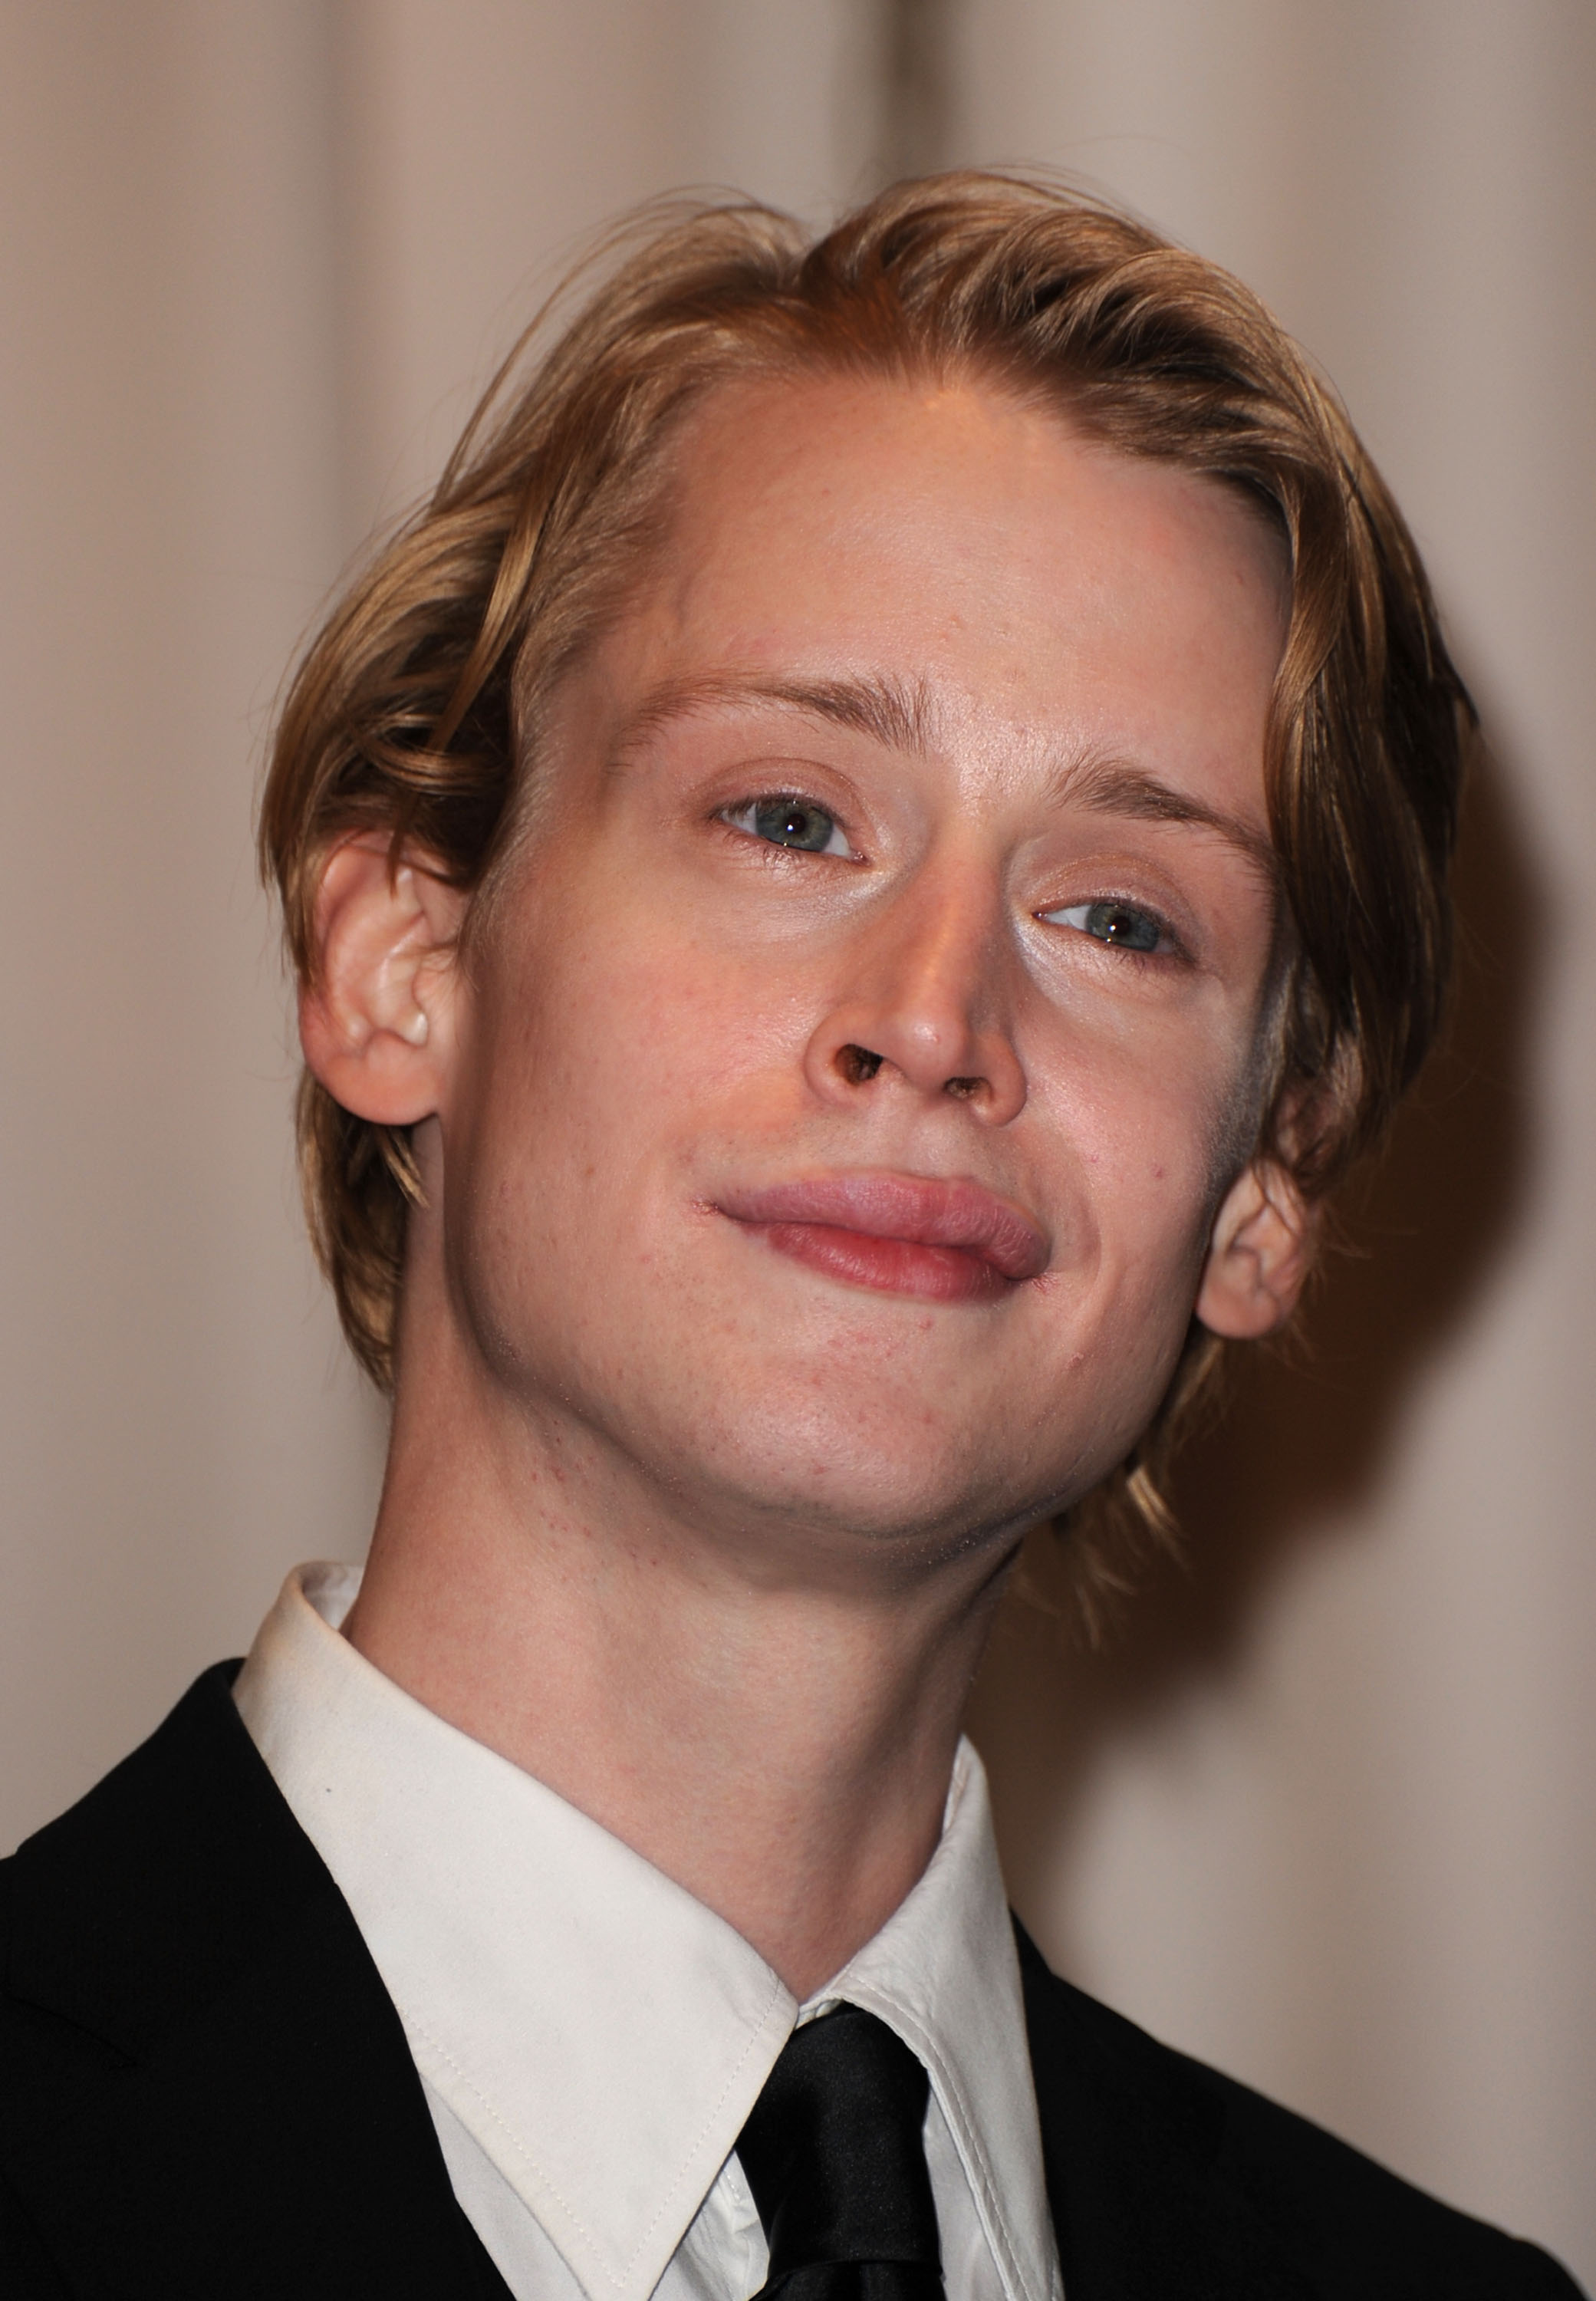 Macaulay Culkin at the 82nd Annual Academy Awards in Hollywood, California on March 7, 2010 | Source: Getty Images